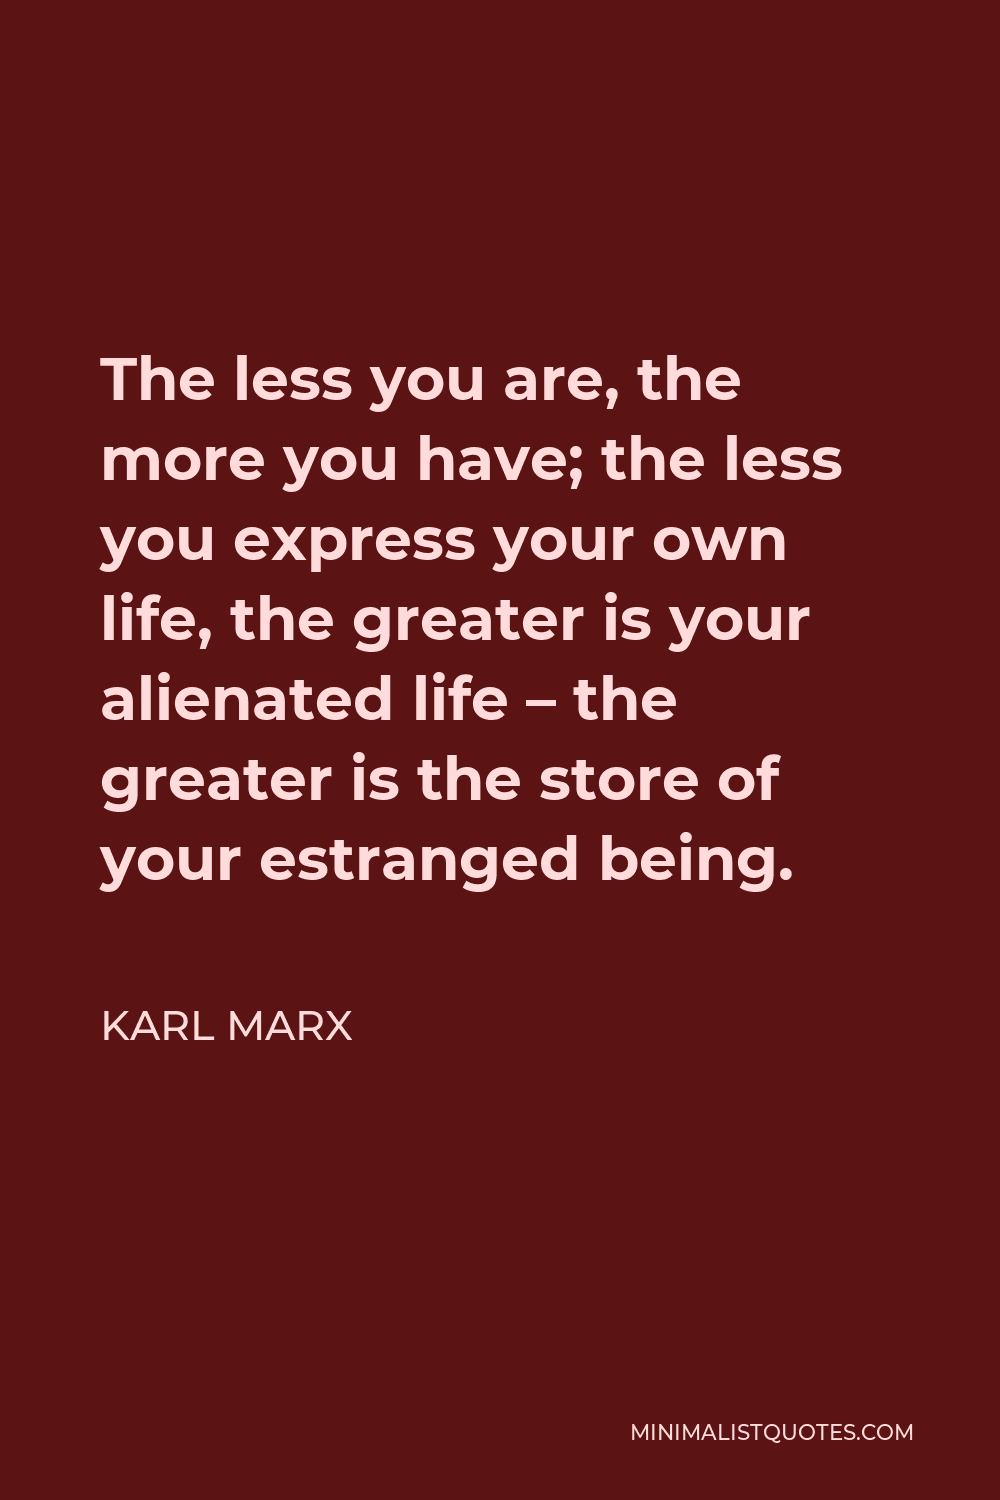 Karl Marx Quote - The less you are, the more you have; the less you express your own life, the greater is your alienated life – the greater is the store of your estranged being.